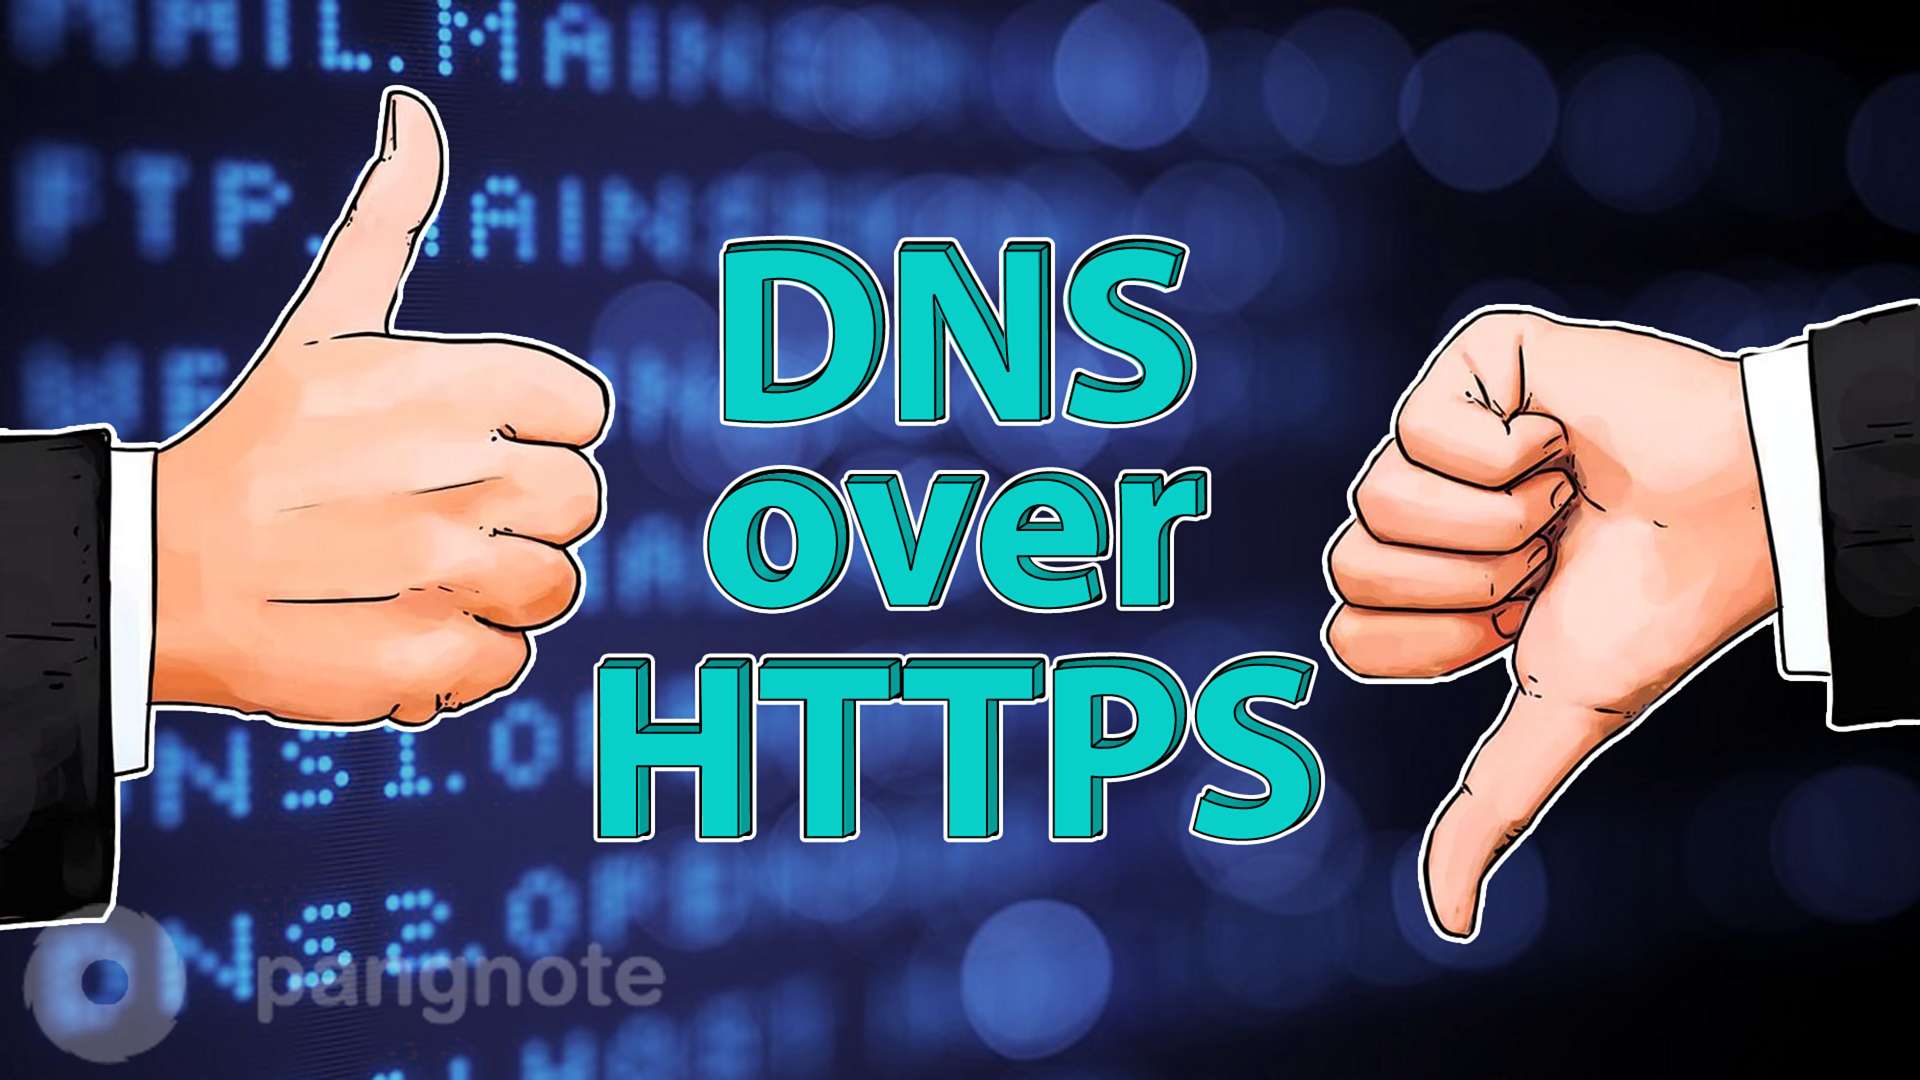 DNS over HTTPS was approved but not everyone is satisfied with it